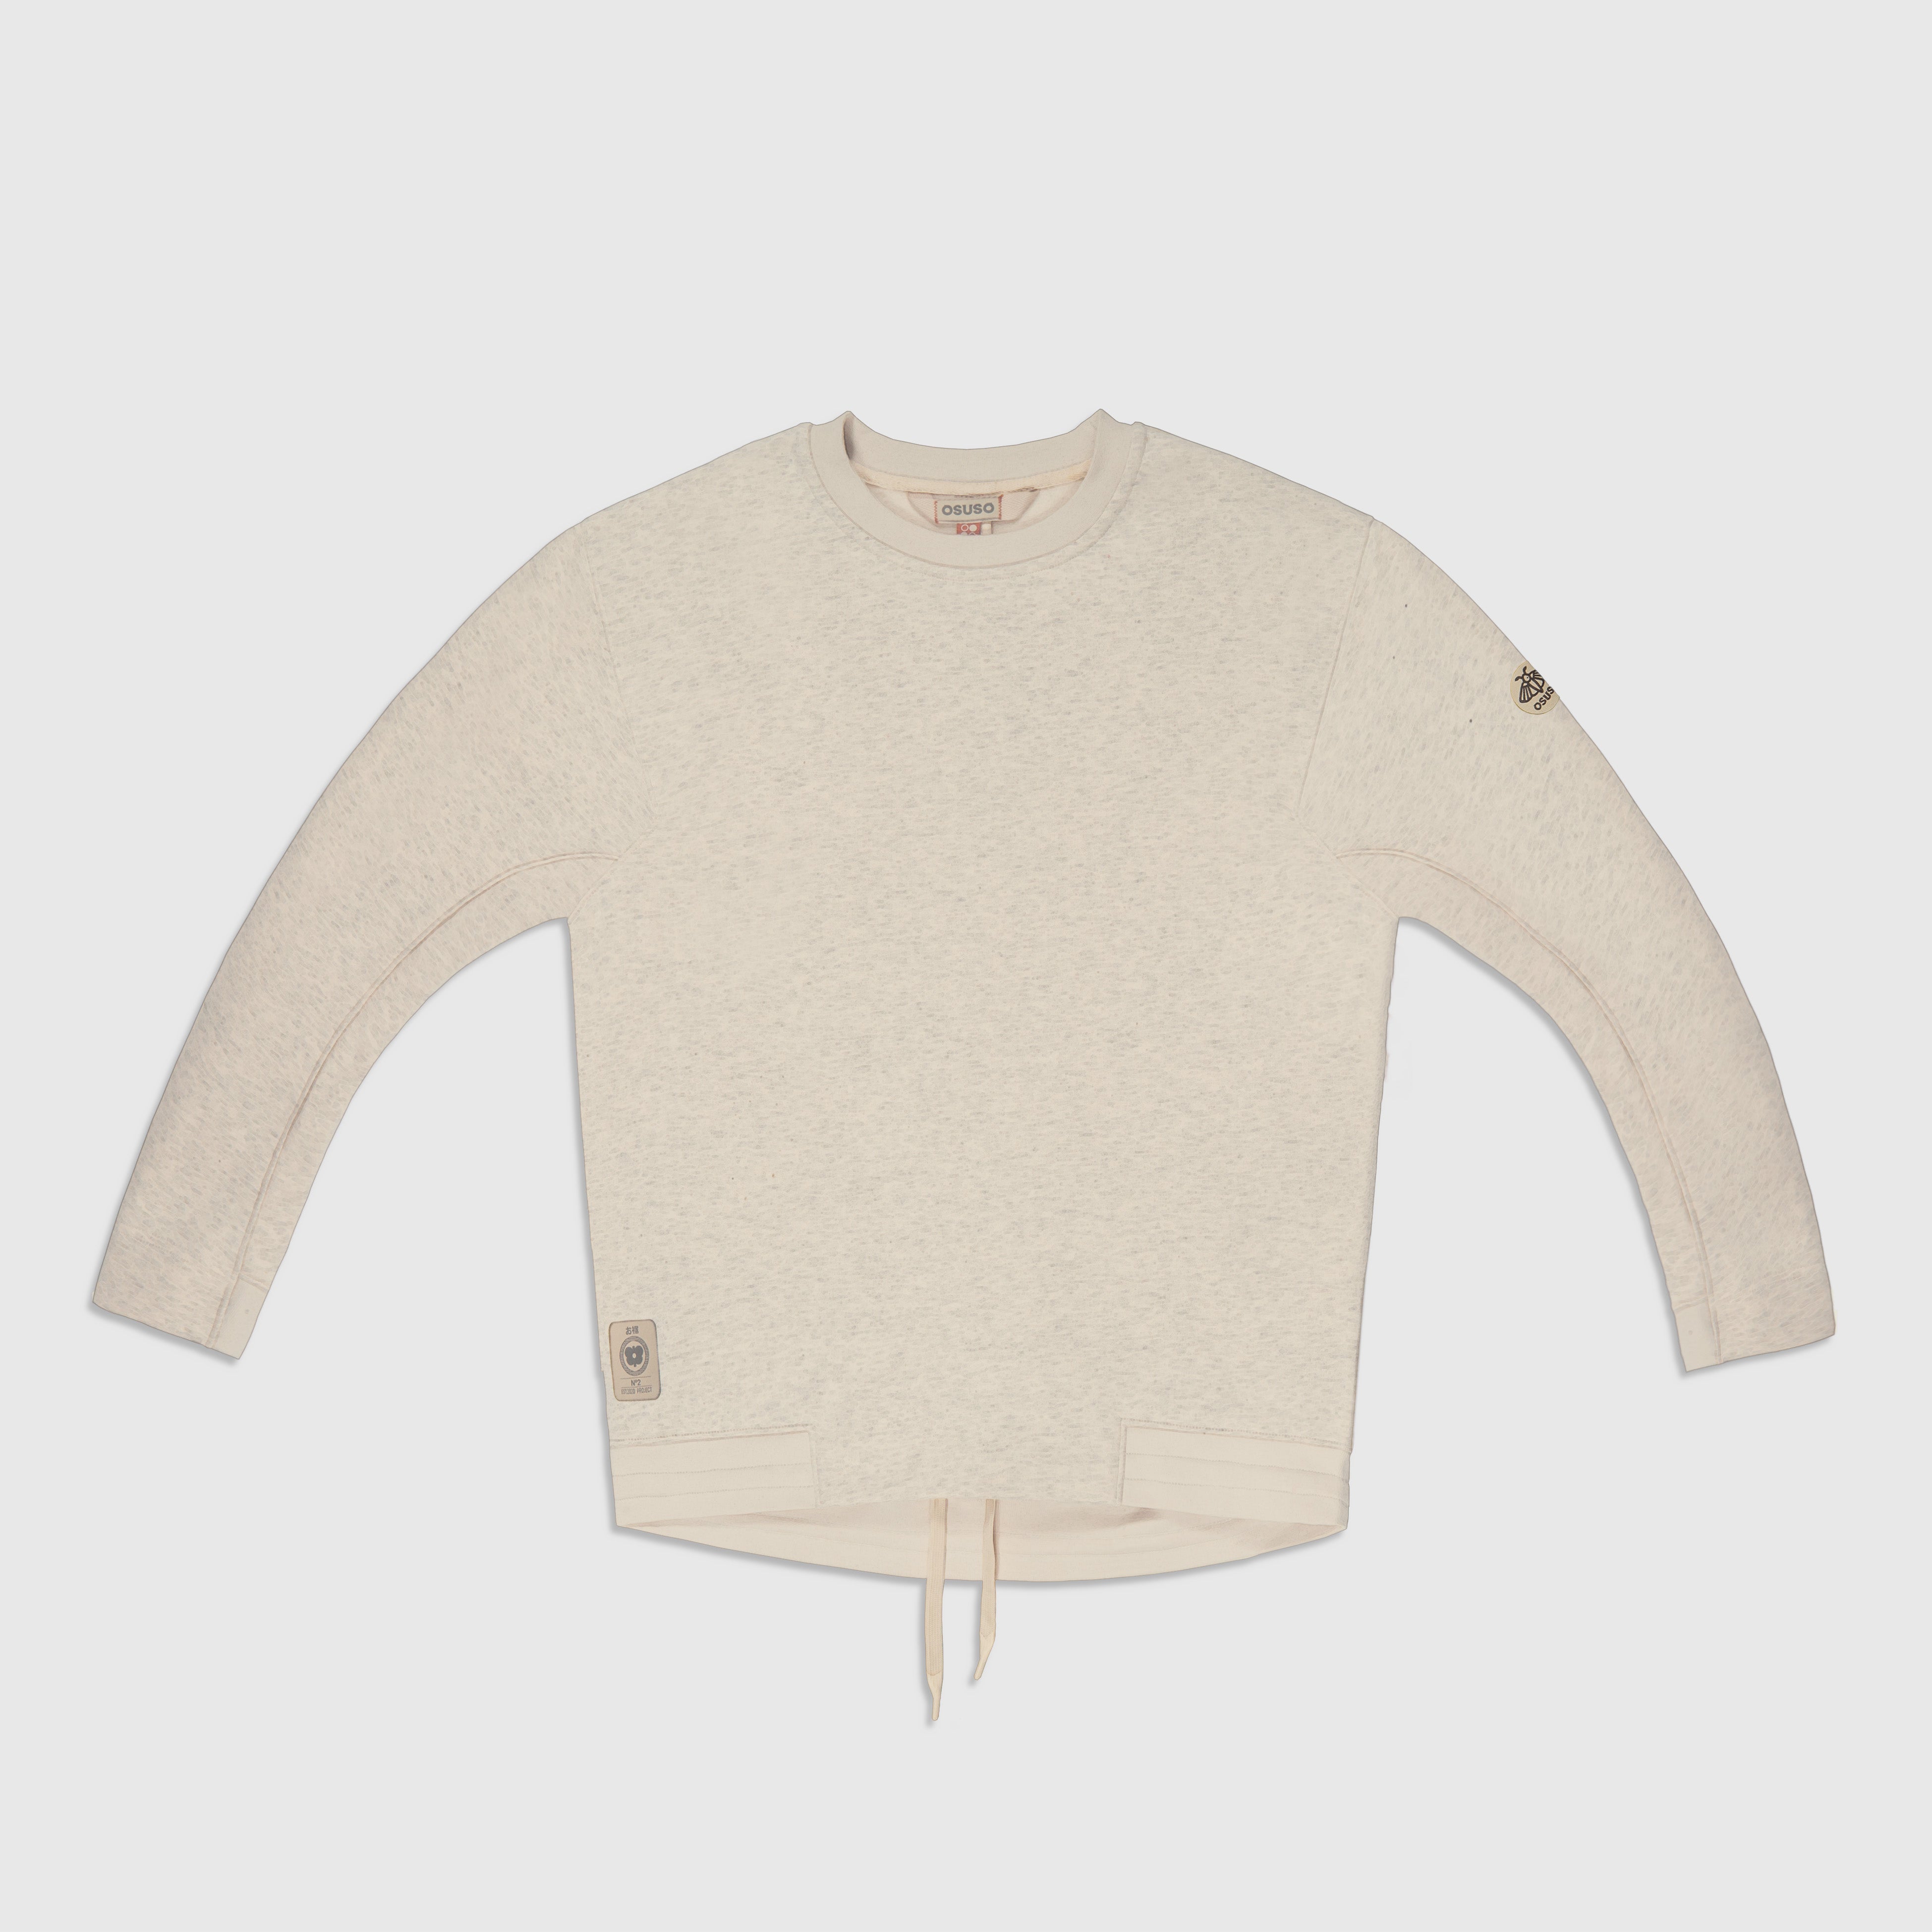 Soph – Fleece Pull-over Crewneck in Offwhite Heather